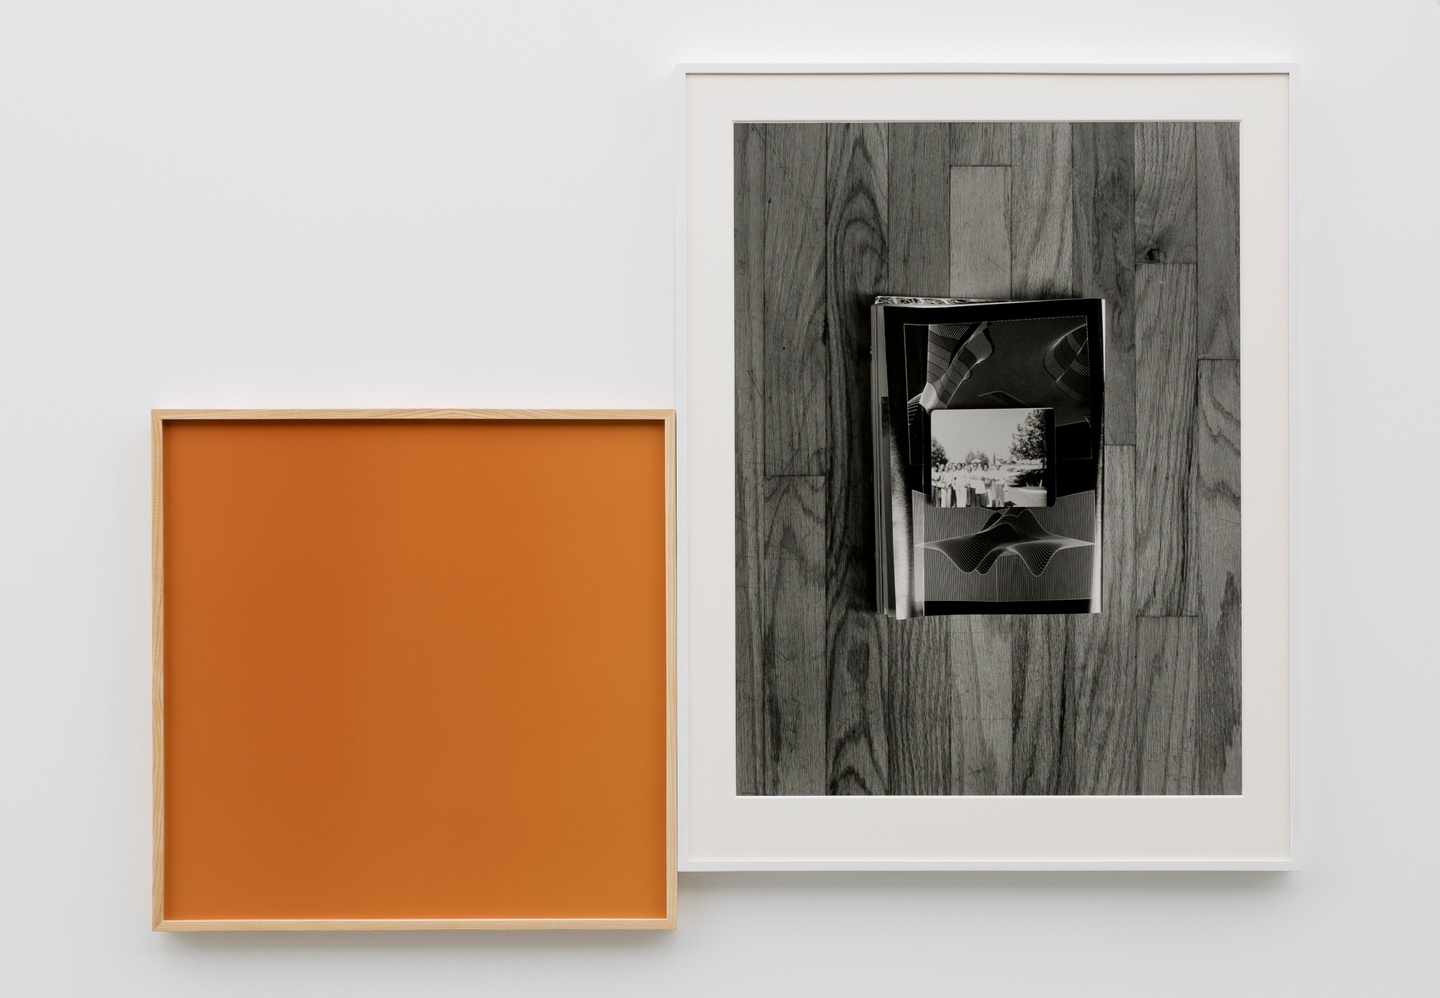 A framed orange square next to a framed black-and-white image of a photo on a wood panel